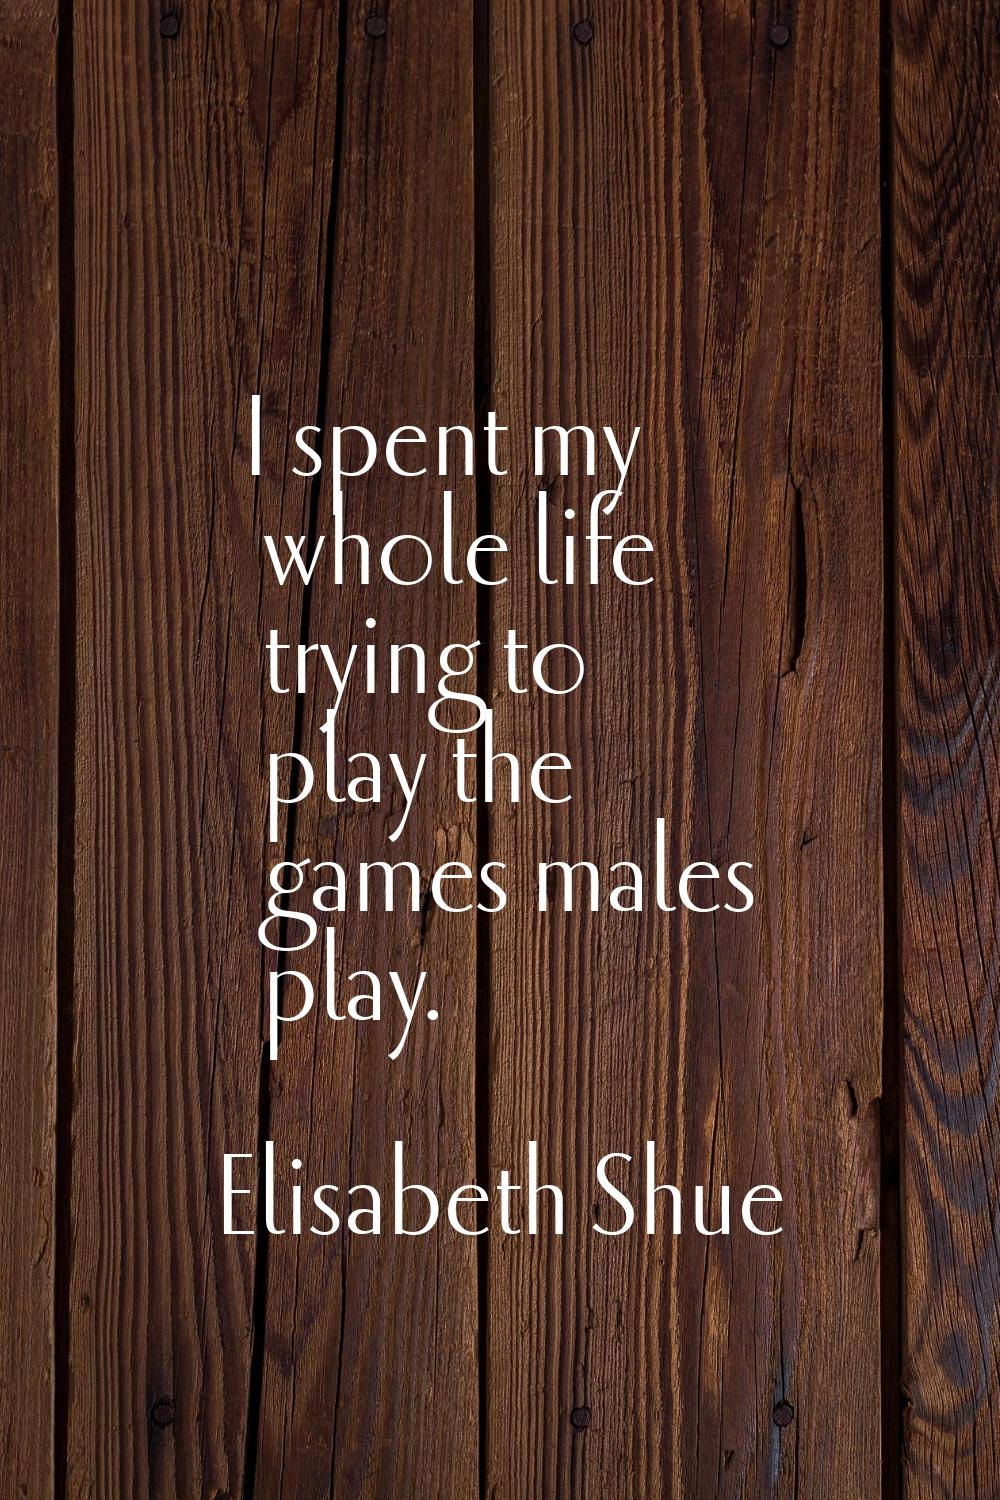 I spent my whole life trying to play the games males play.